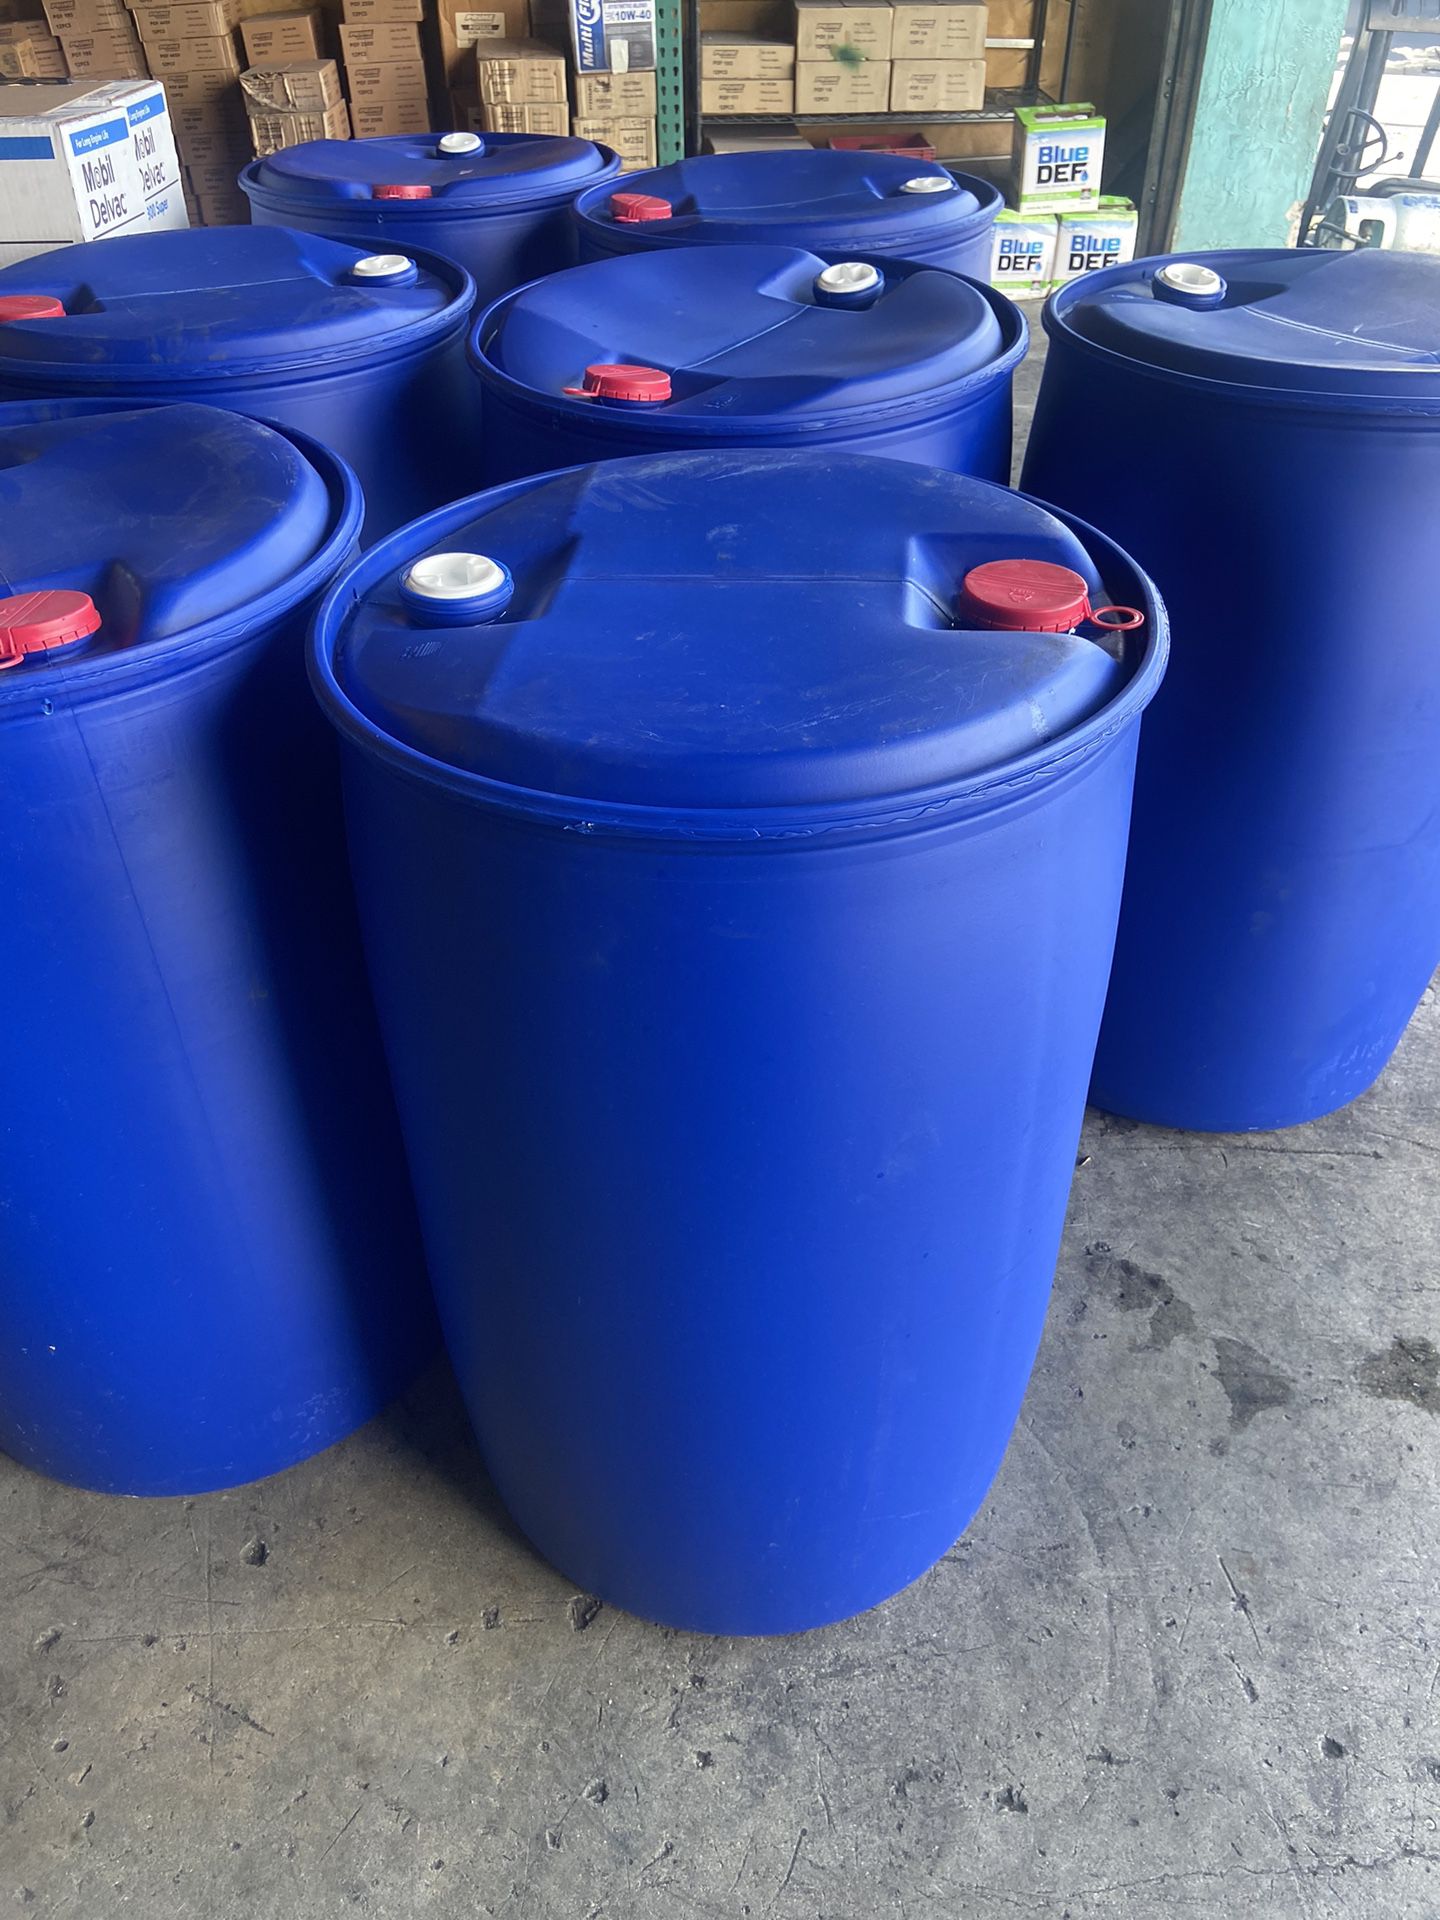 PLASTIC 55 GALLON DRUMS FOOD GRADE CLEAN VERY GOOD CONDITION $20